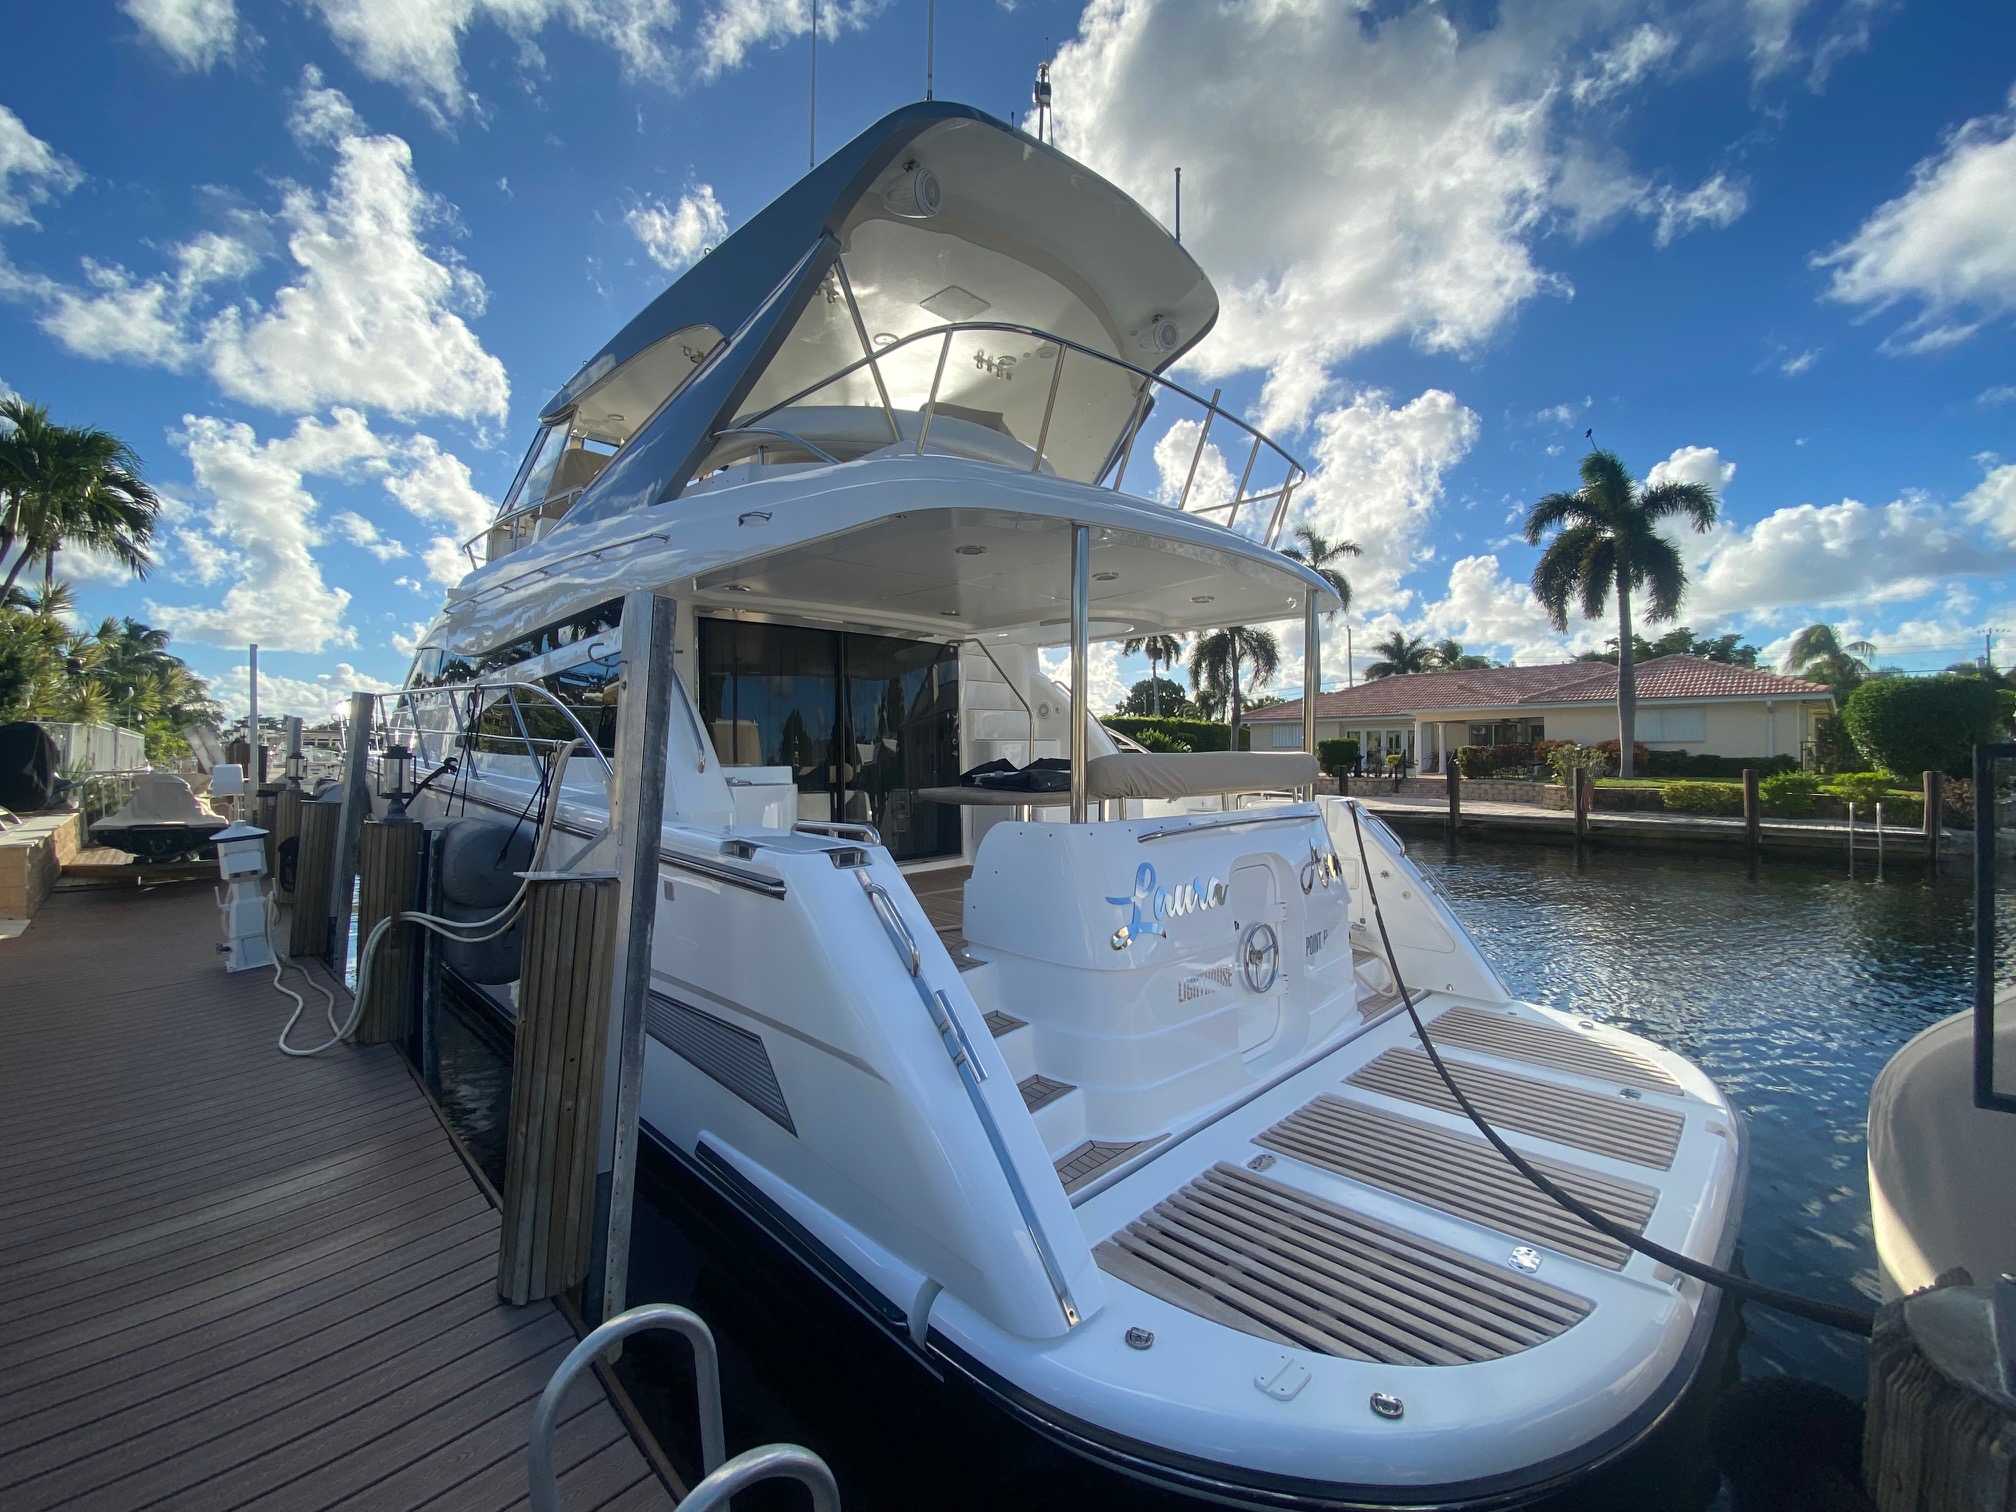  Yacht & Boat Detailing Service in Fort Lauderdale